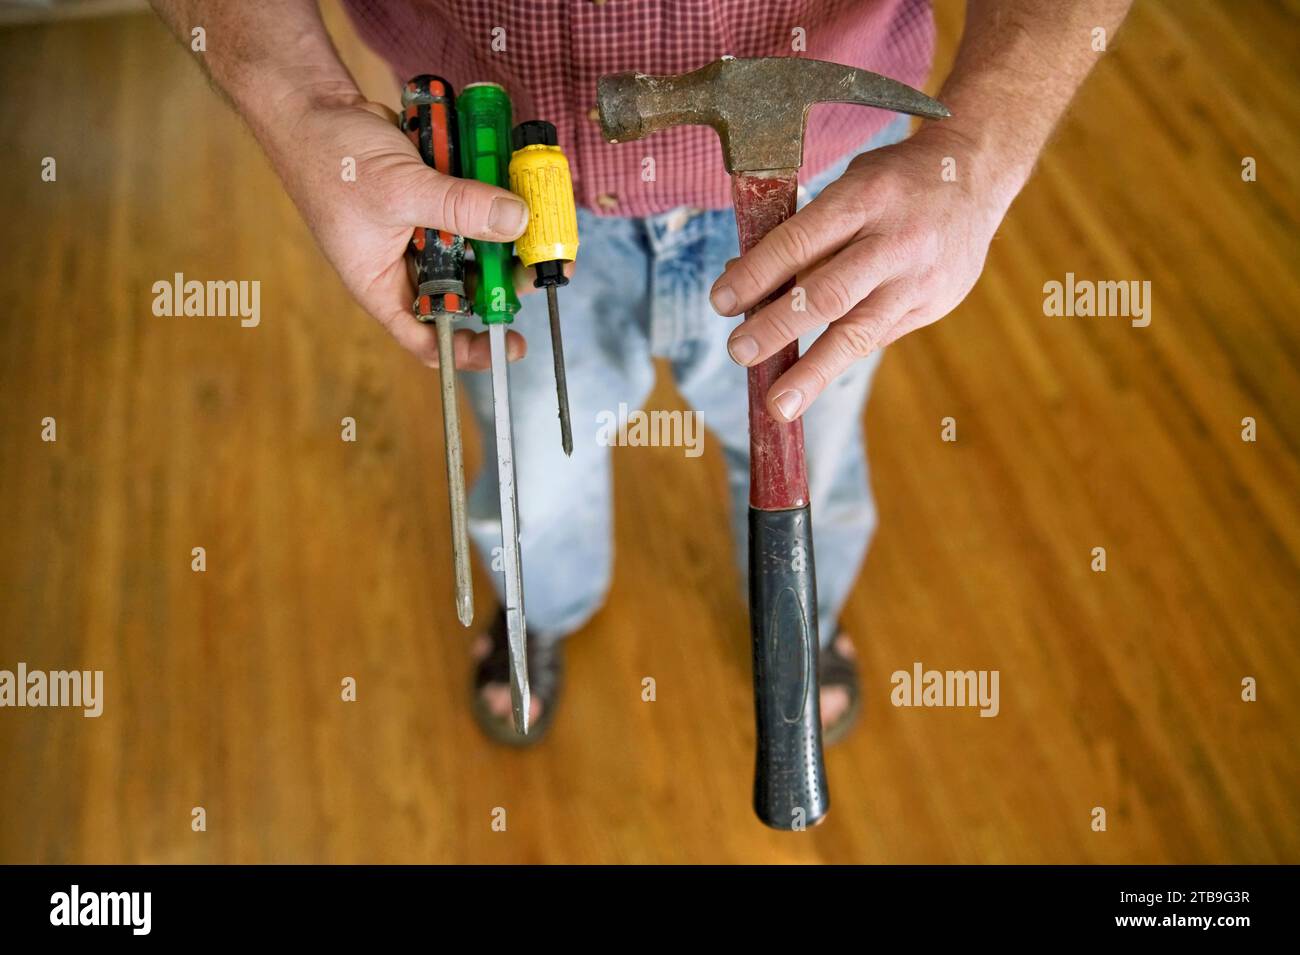 Close up of a man's hands holding various tools; Lincoln, Nebraska, United States of America Stock Photo